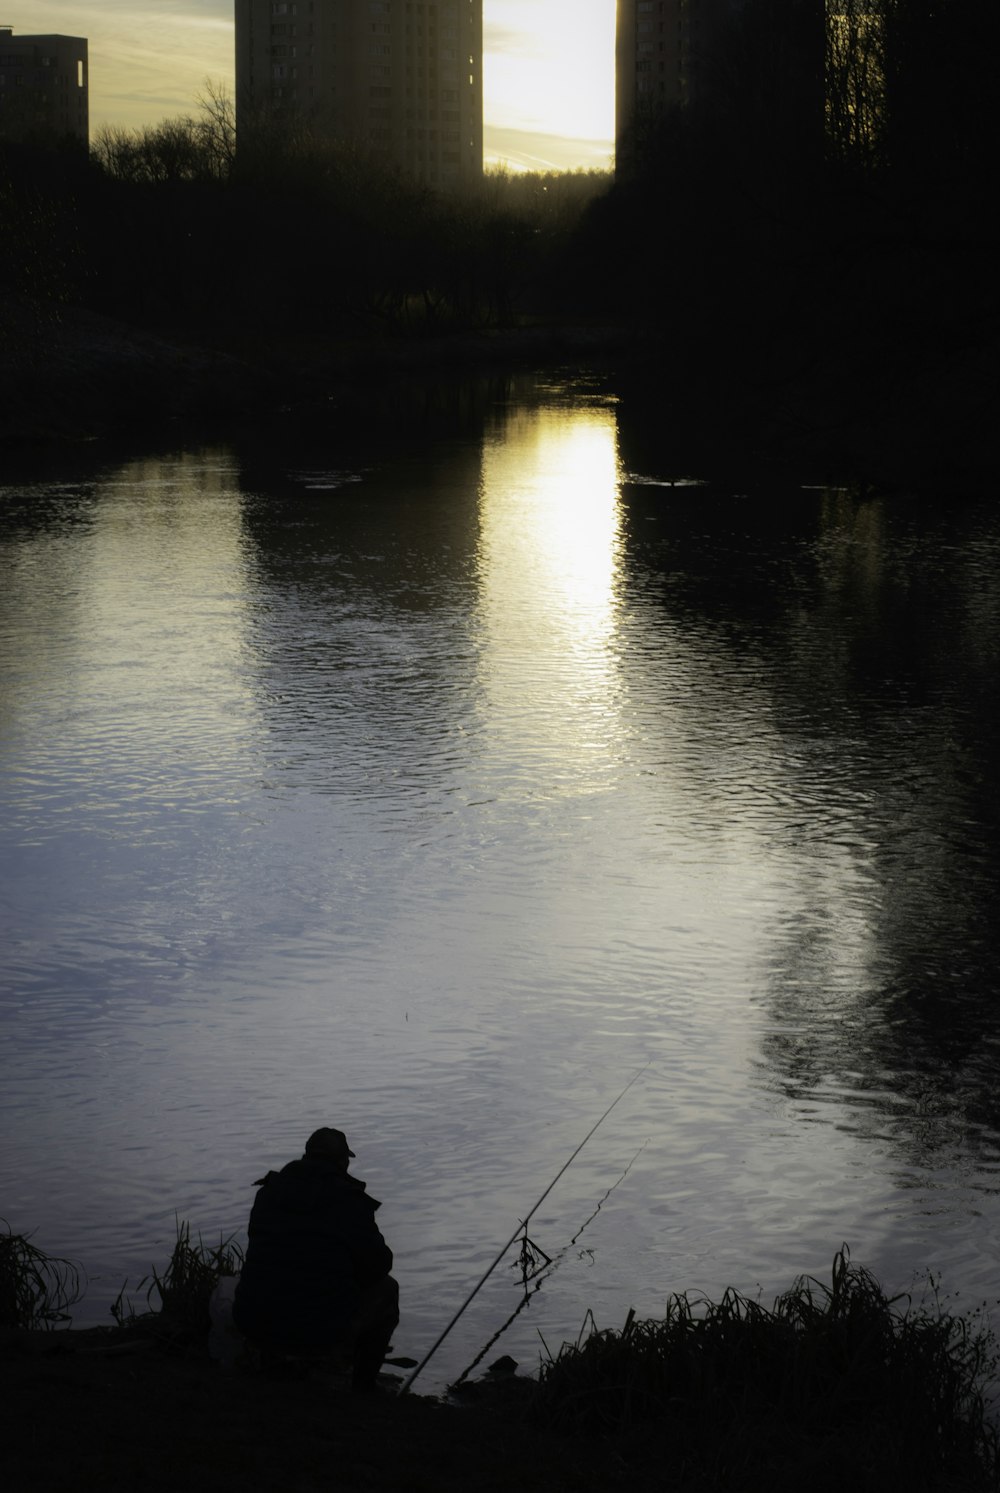 a person fishing in a river